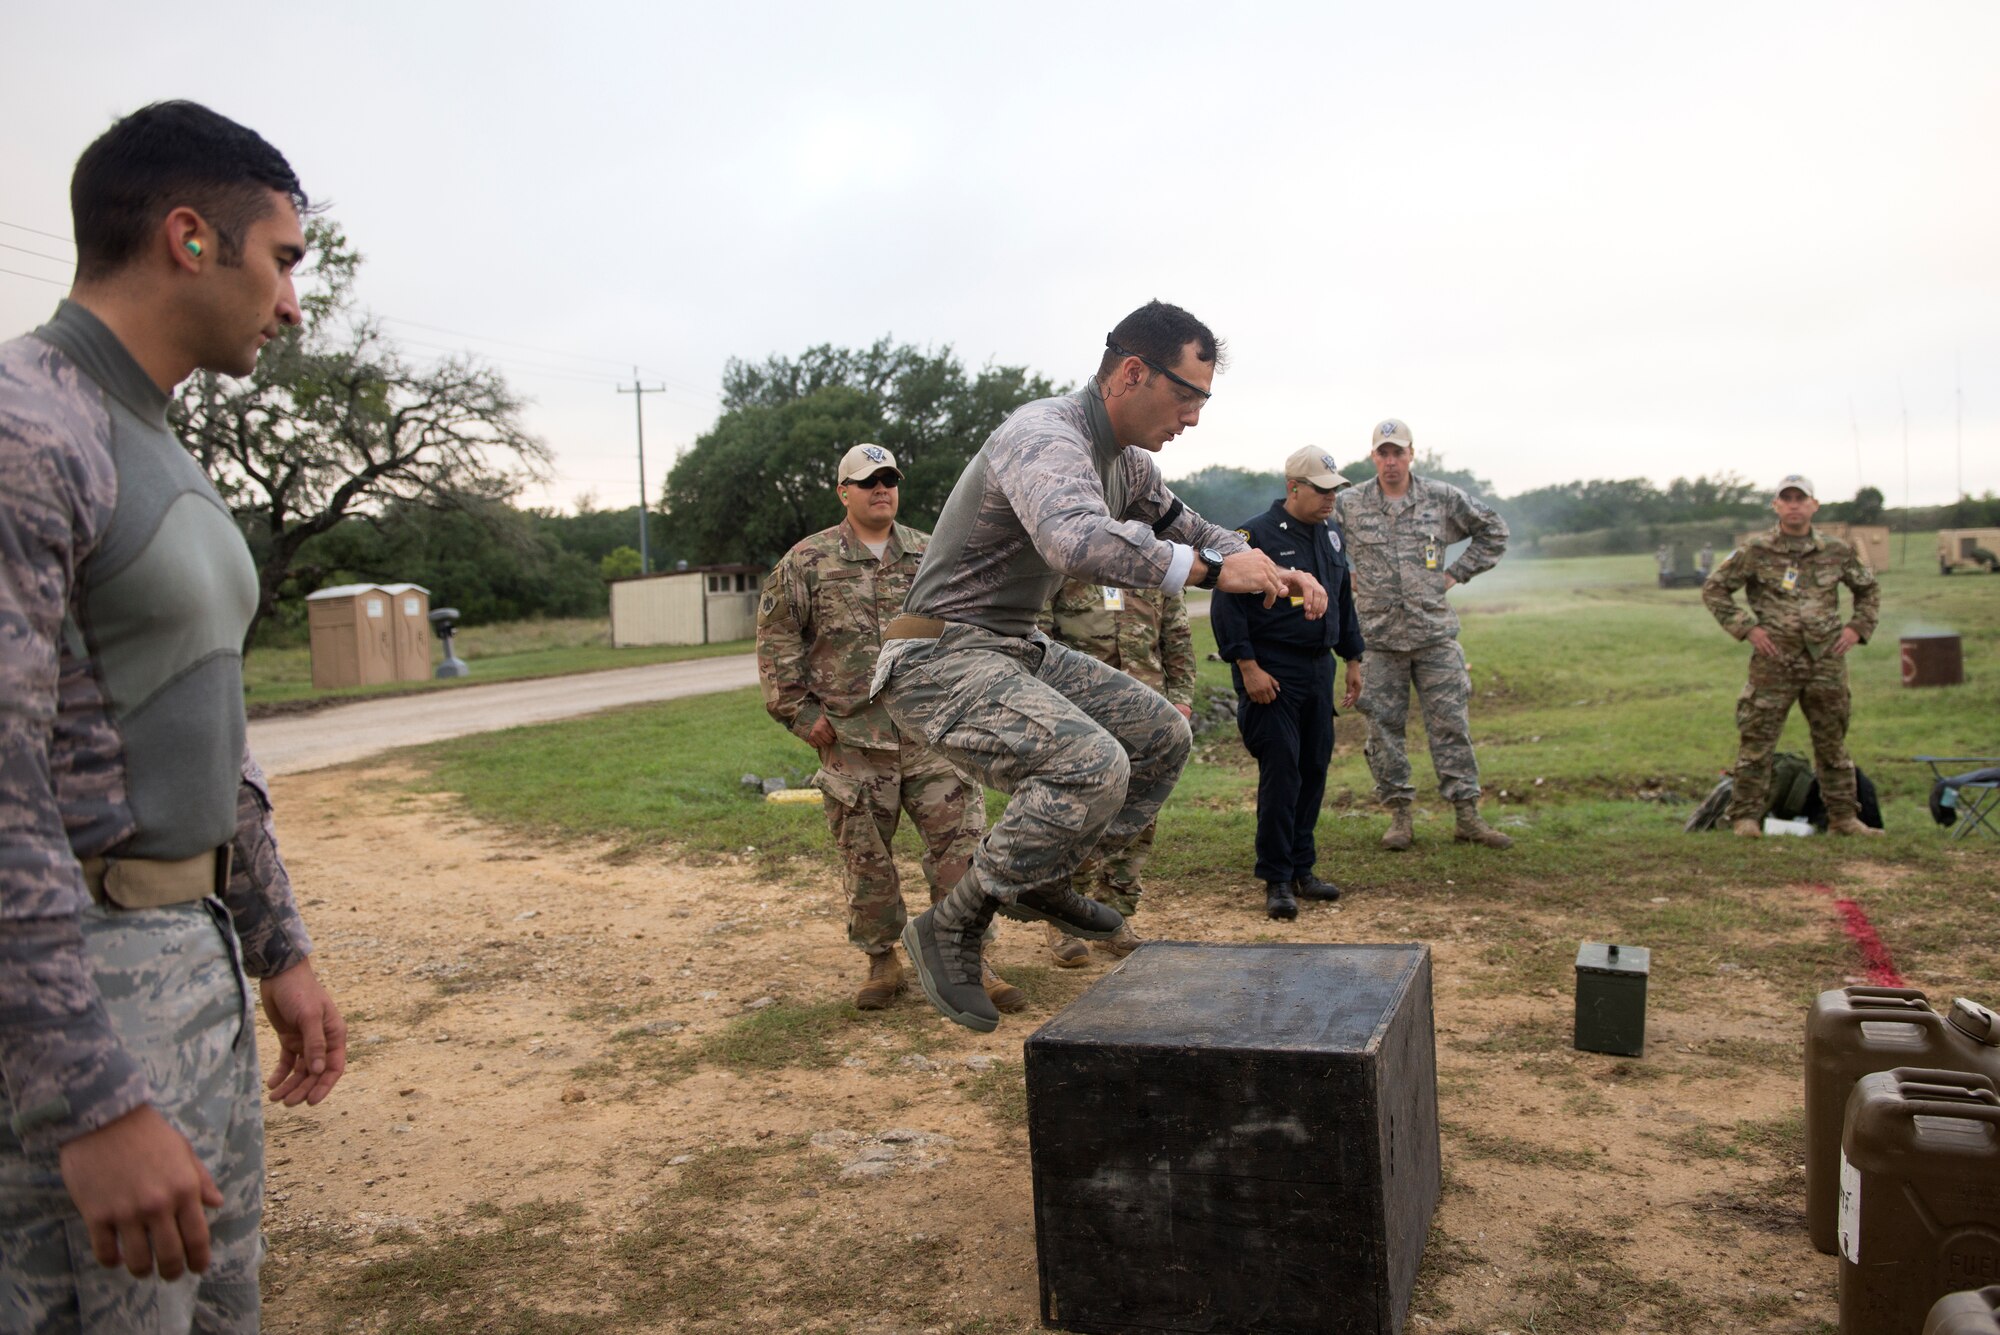 Senior Airman Joseph Pace, 92nd Security Forces Squadron installation patrolman, competes on the Air Mobility Command team during a combat endurance competition during Air Force 2018 Defender Challenge in Joint Base San Antonio, Texas, Sept. 13, 2018. Fourteen Security Forces teams from Great Britain, Germany and U.S. Air Force major commands test their skills in realistic weapons scenarios, simulated dismounted operations and grueling combat endurance events as part of Air Force Defender Challenge. The team with the most combined points wins the coveted Defender Challenge Championship Trophy. (U.S. Air Force photo/ Sarayuth Pinthong)